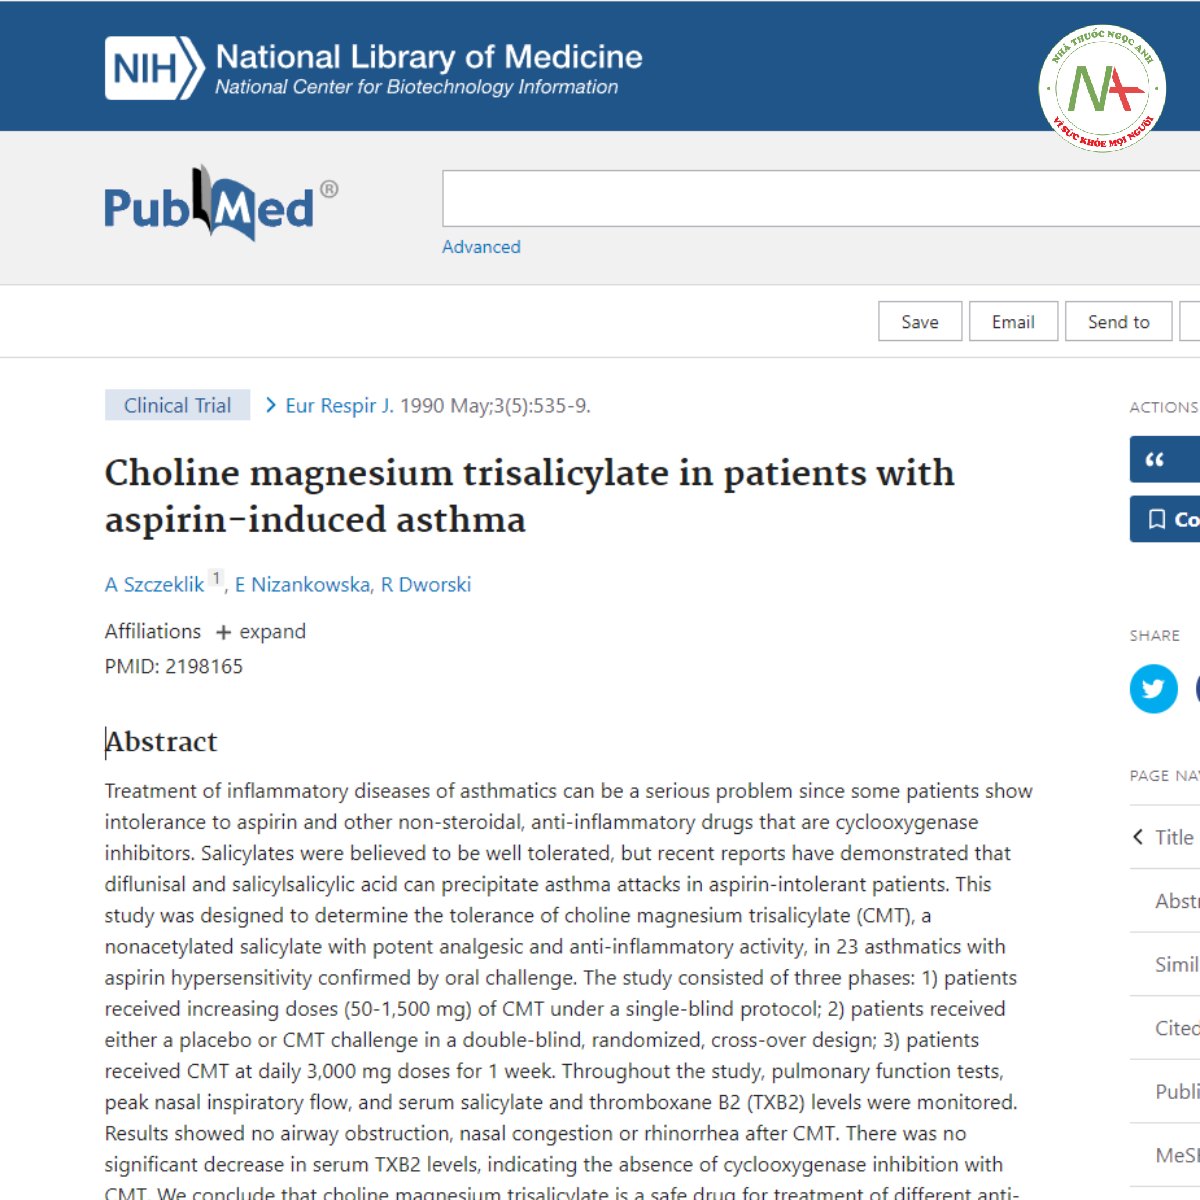 Choline magnesium trisalicylate in patients with aspirin-induced asthma